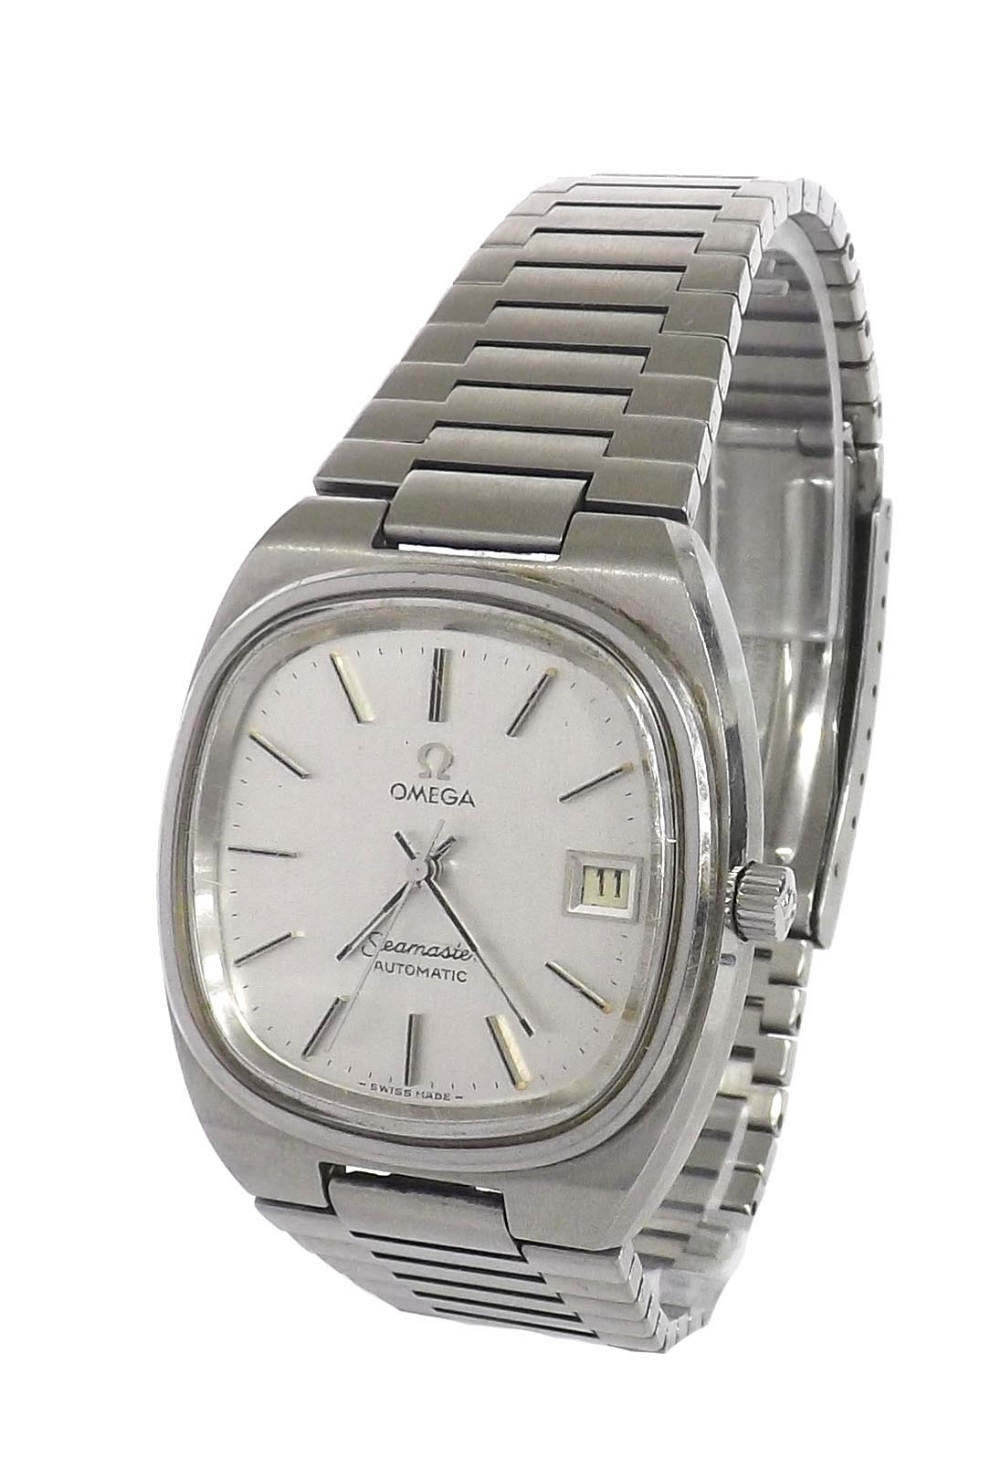 Omega Seamaster automatic stainless steel gentleman's bracelet watch, the cushioned square